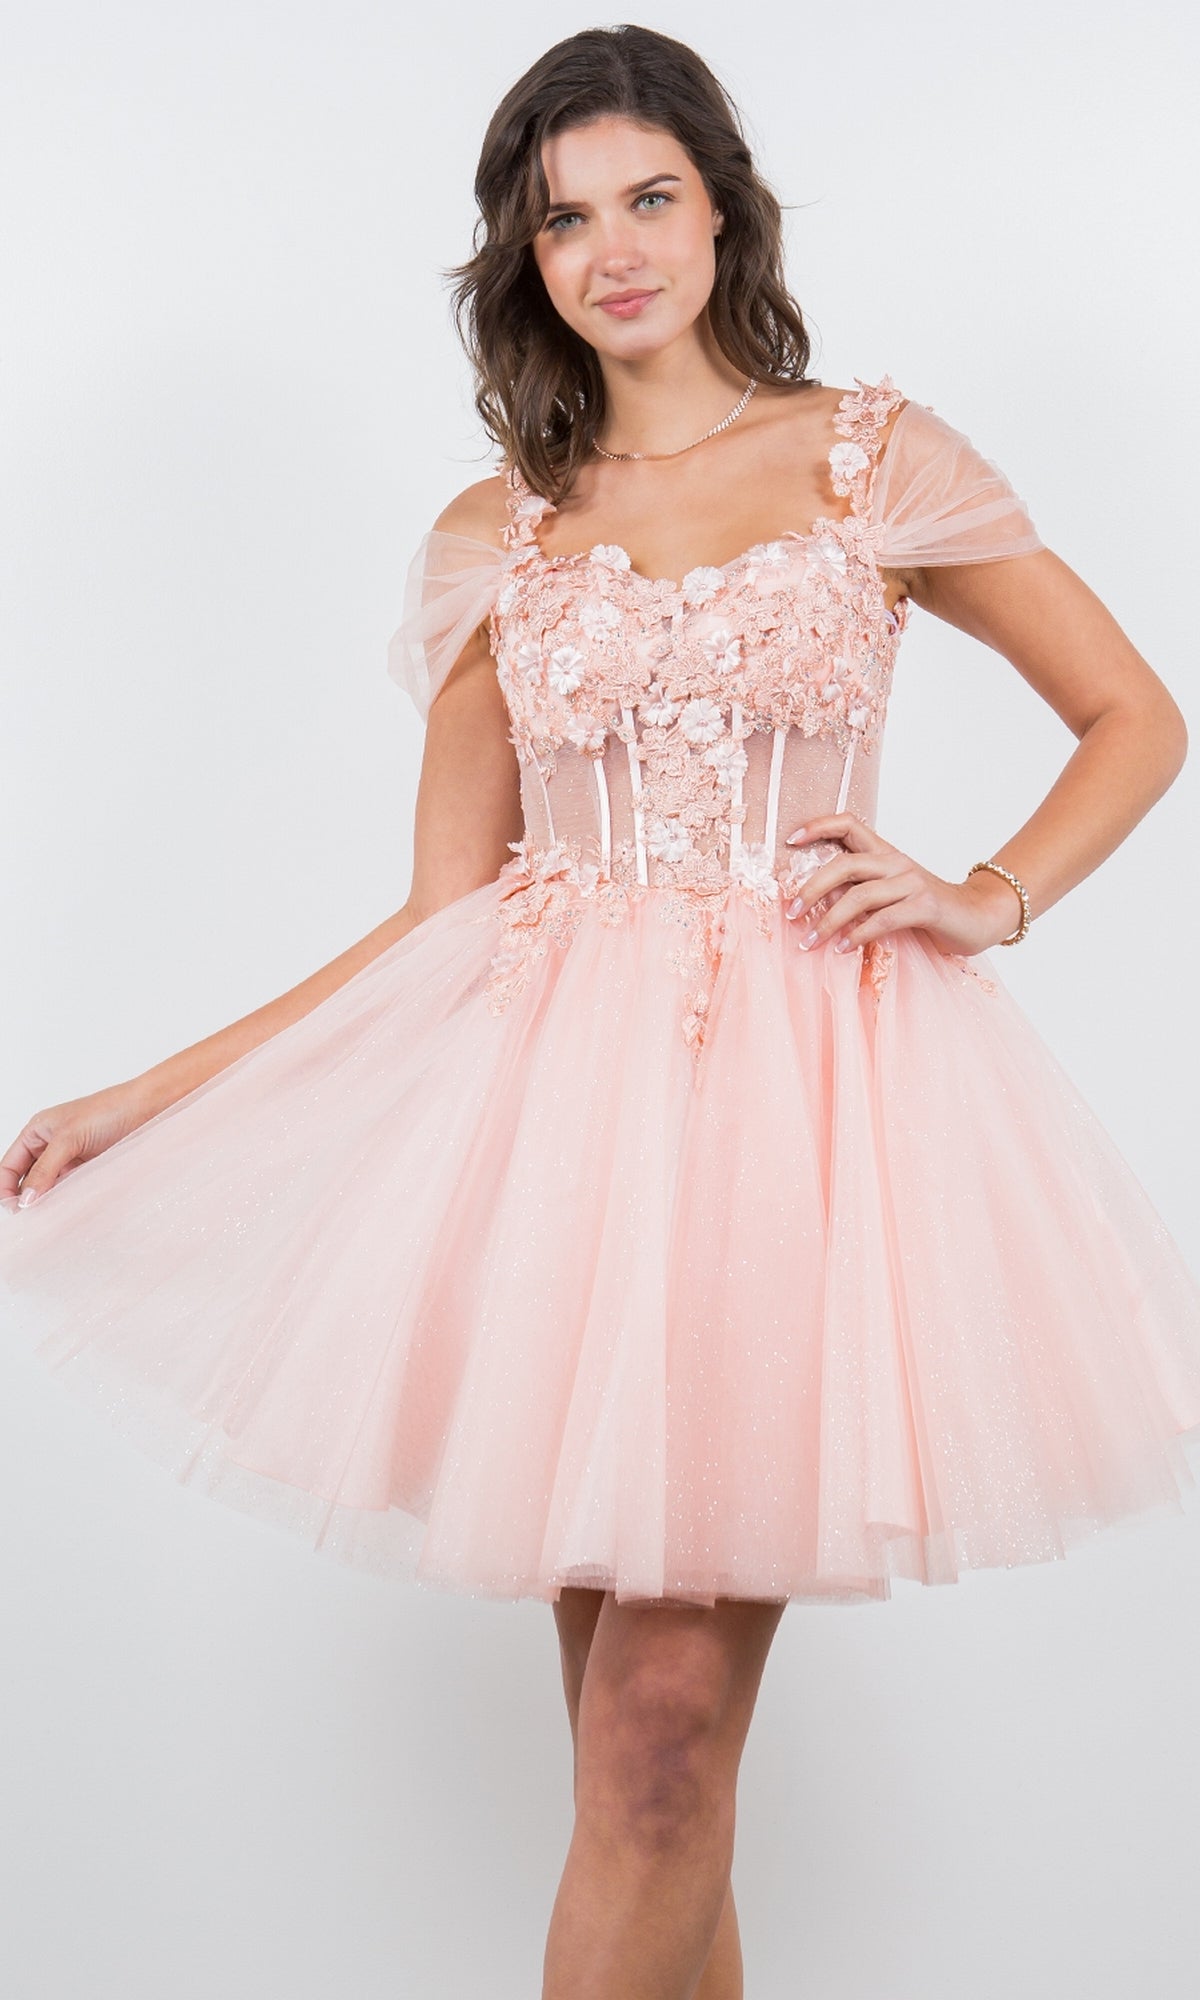 Glitter-Tulle Fit-and-Flare Short Prom Dress 5134J